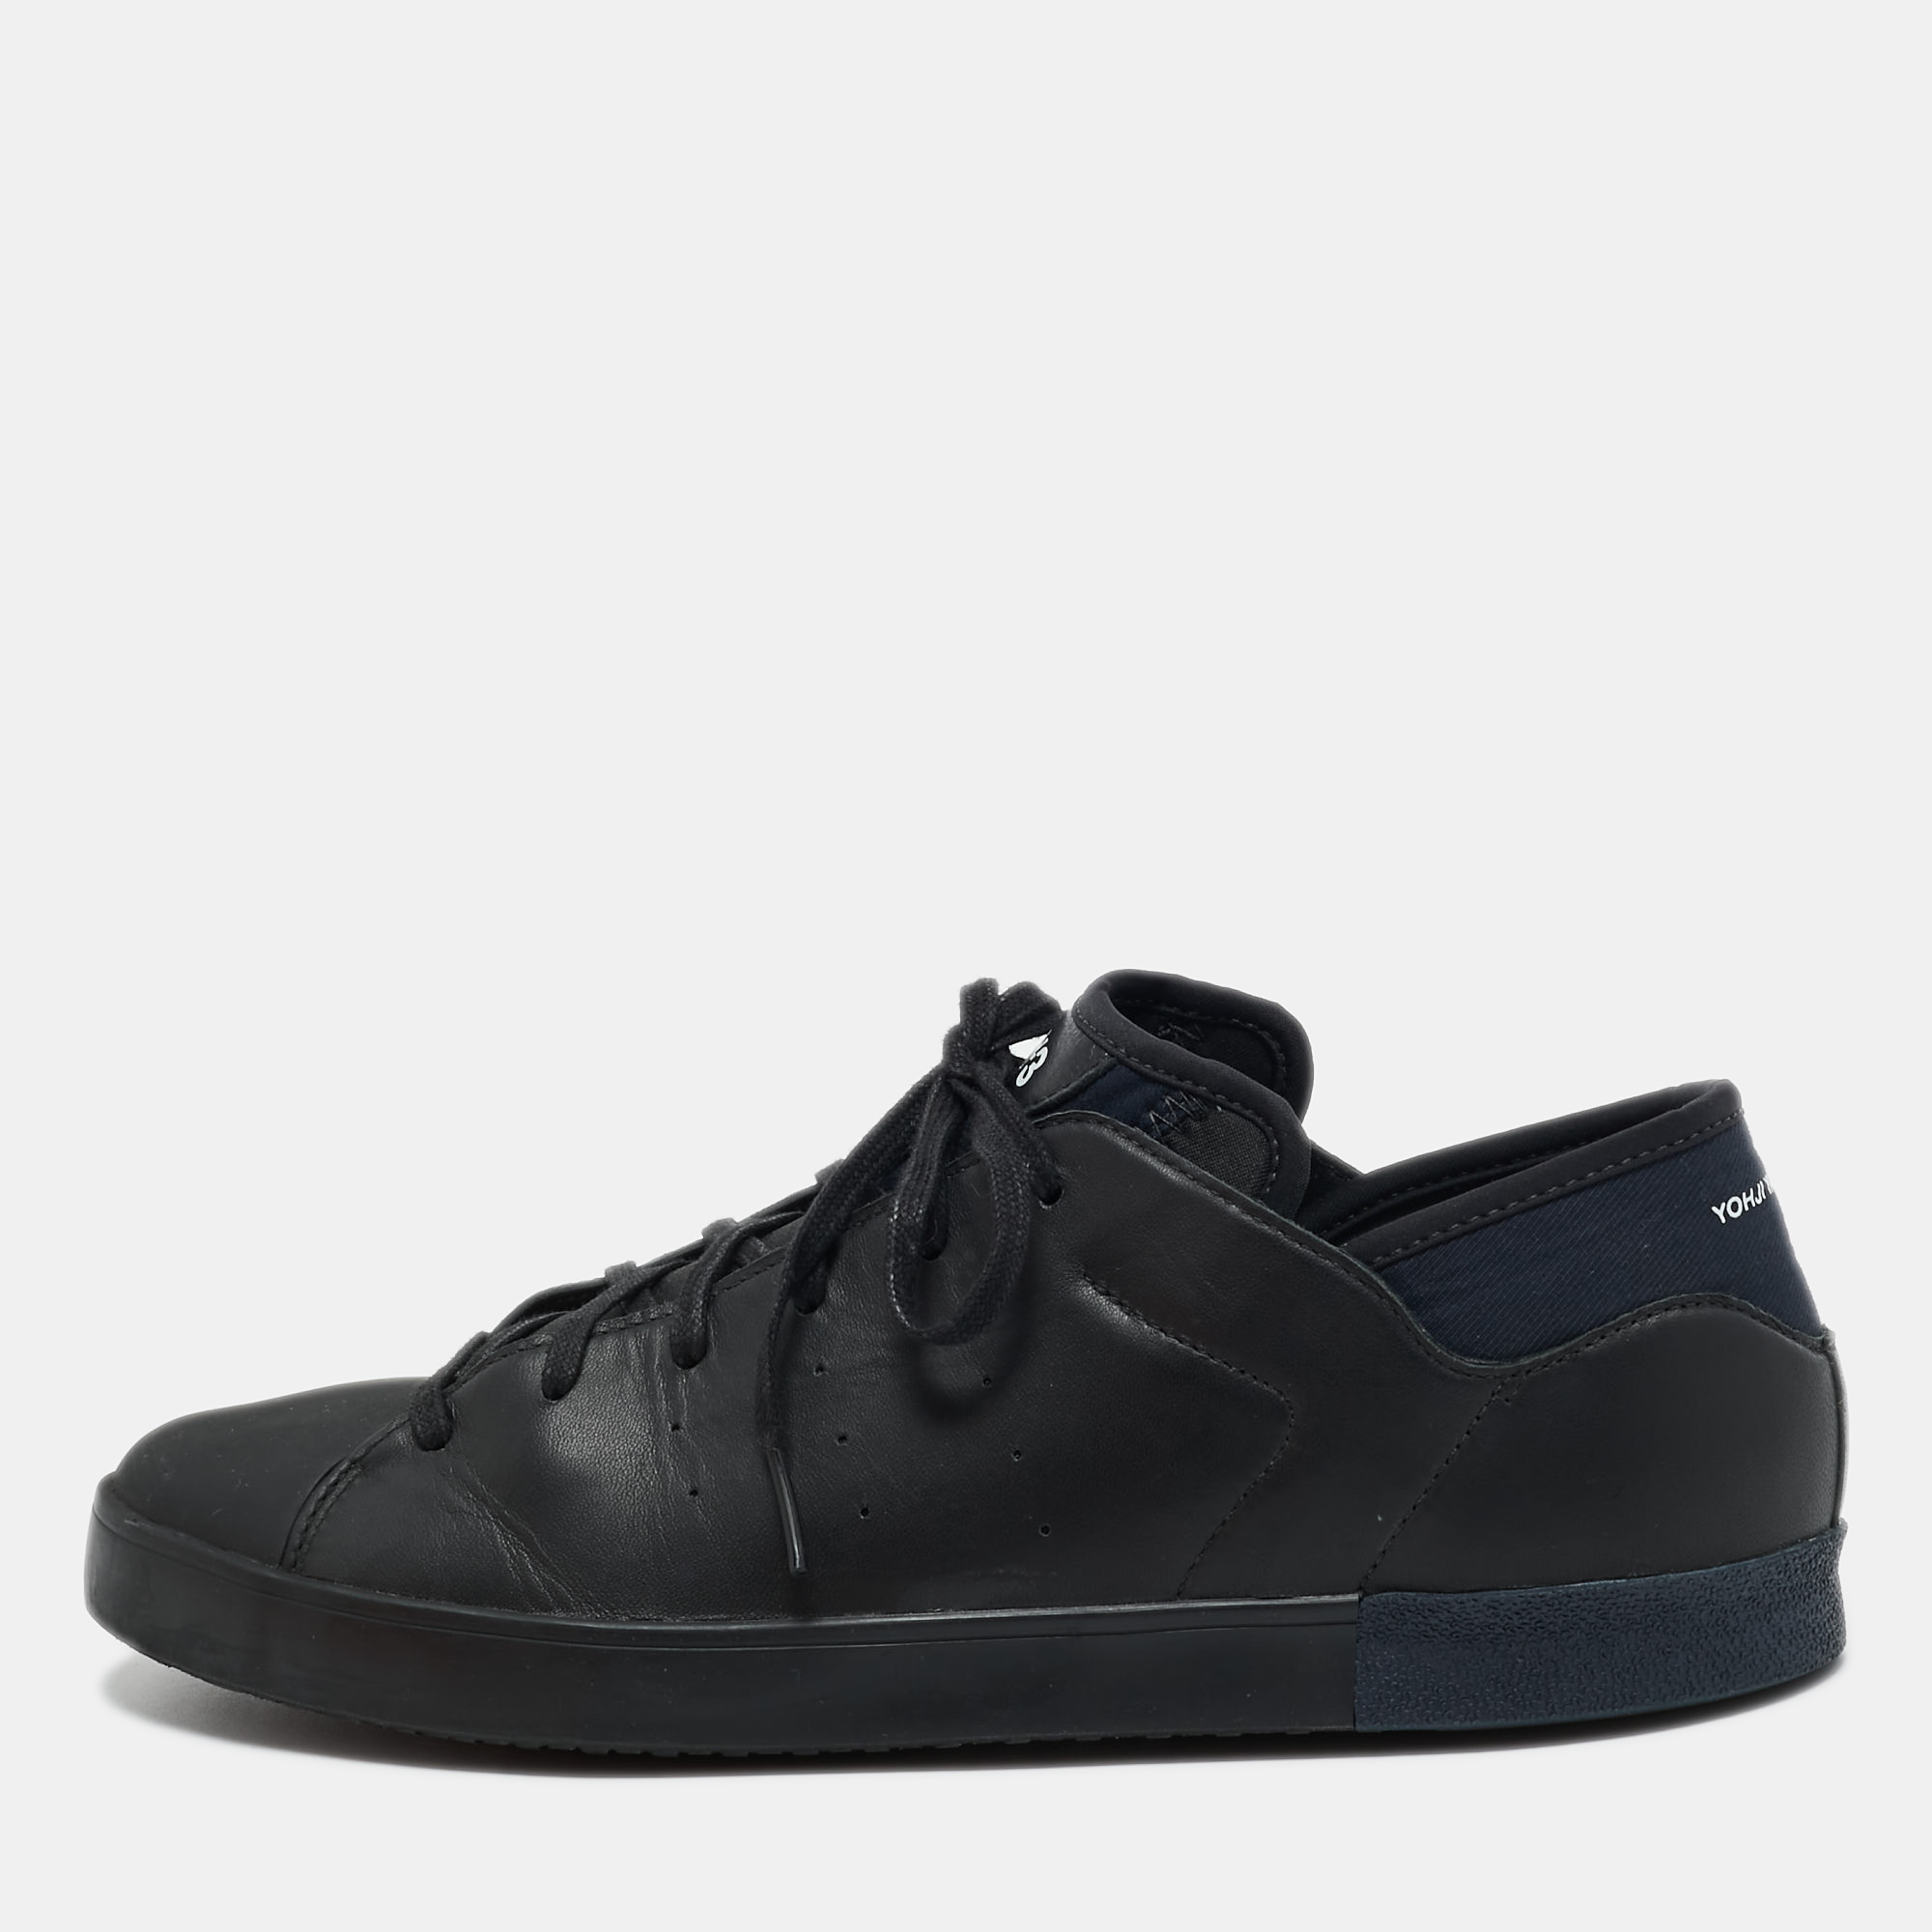 Y-3 Black Leather Low-Top Sneakers Size 42